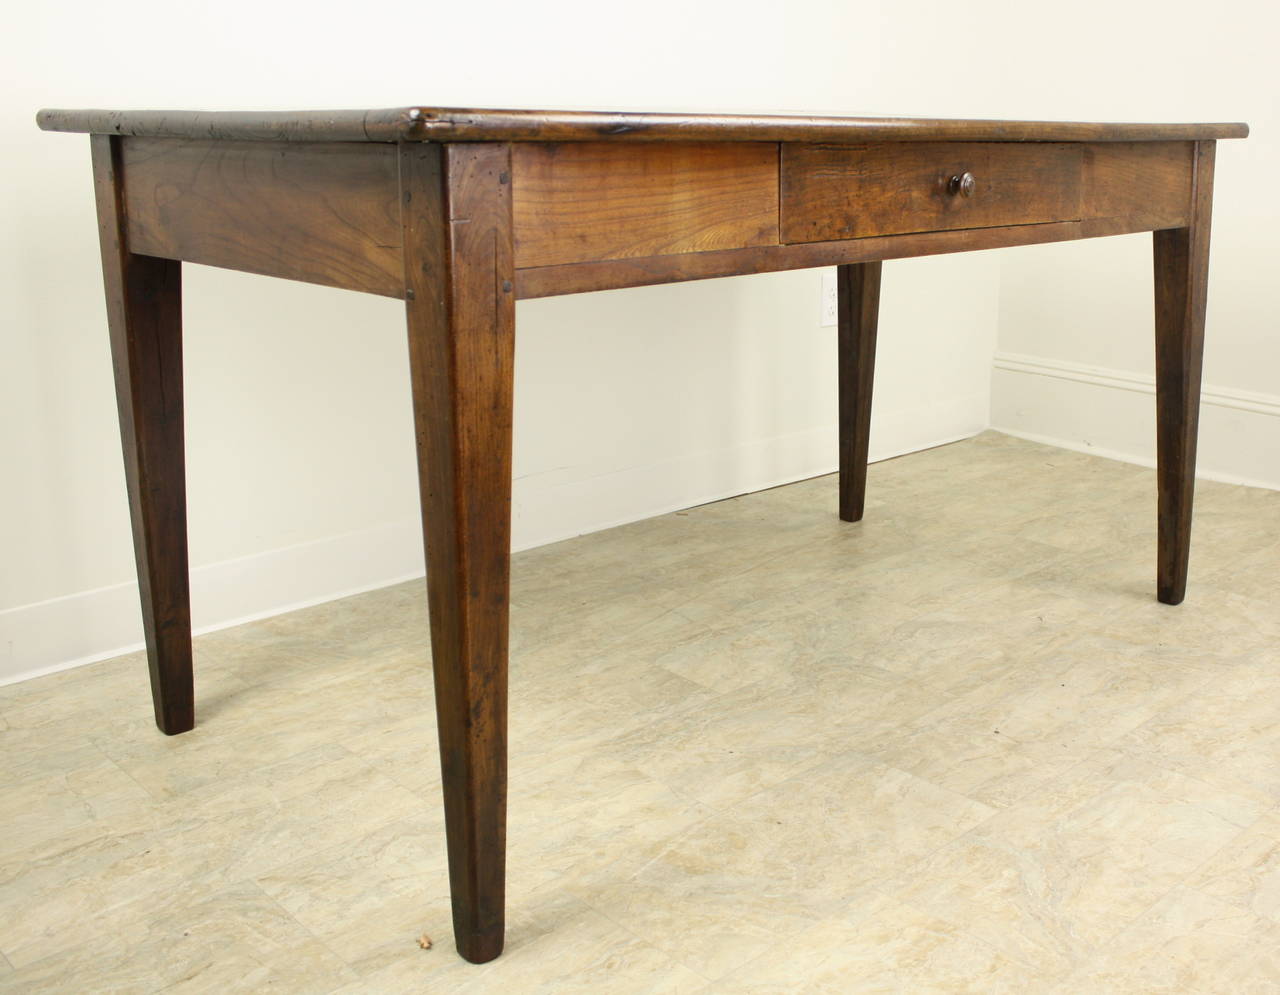 This desk is a very classic French style, with lovely slender tapered legs, and one drawer in the apron.  The cherry is a warm beautiful color, with a fine patina.  Legs are pegged in the traditional style.  Apron height is a good 24